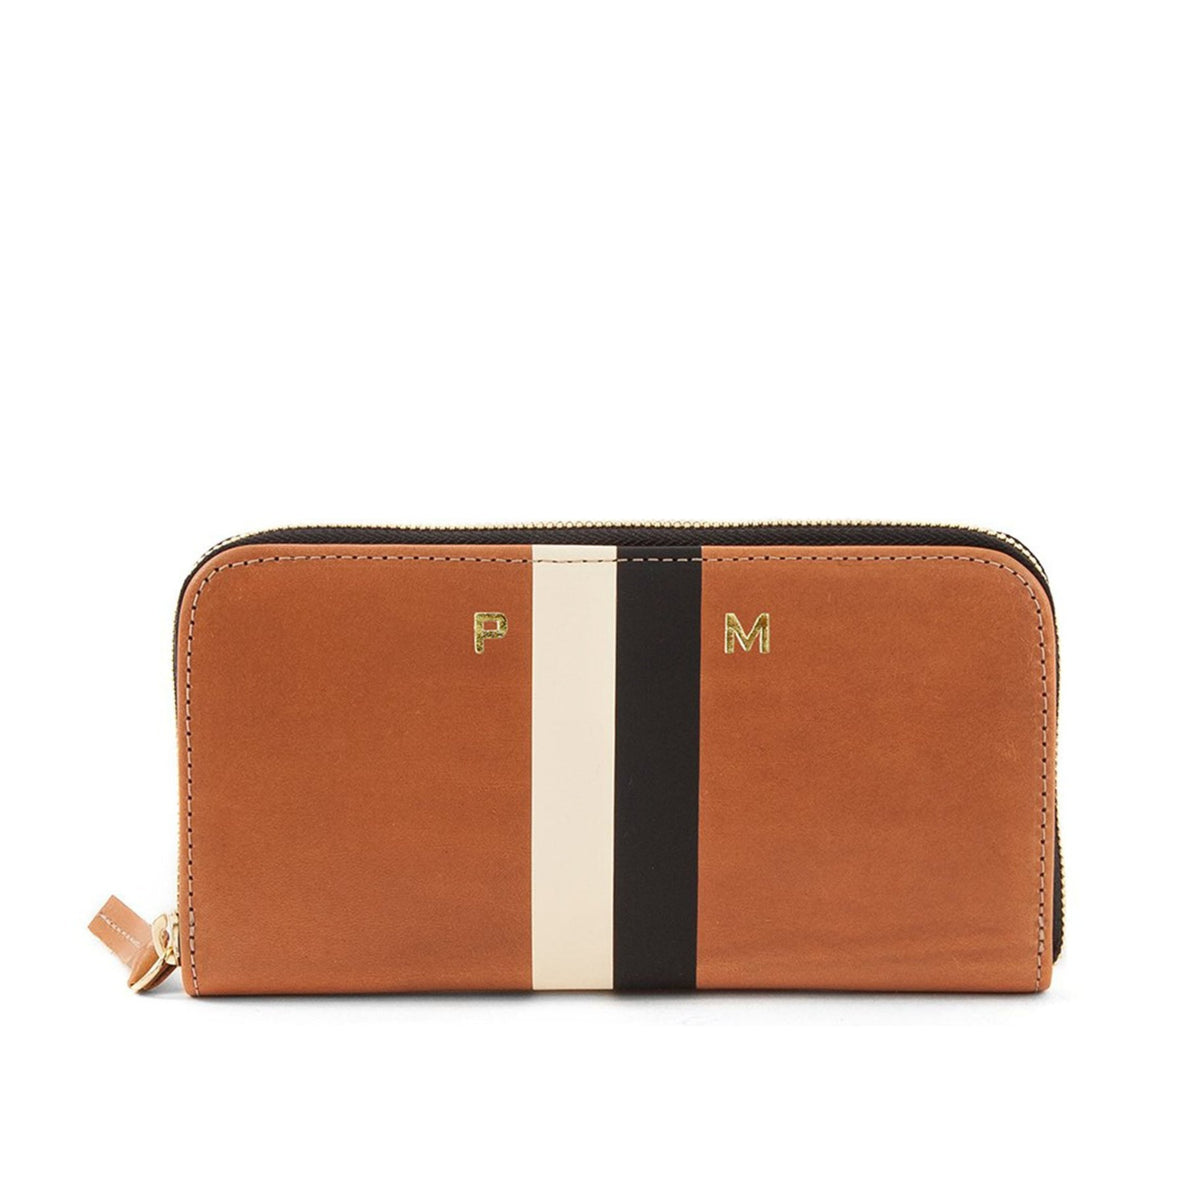 Clare V - Wallet Clutch w/ Tabs in Black Suede & Nappa Patchwork